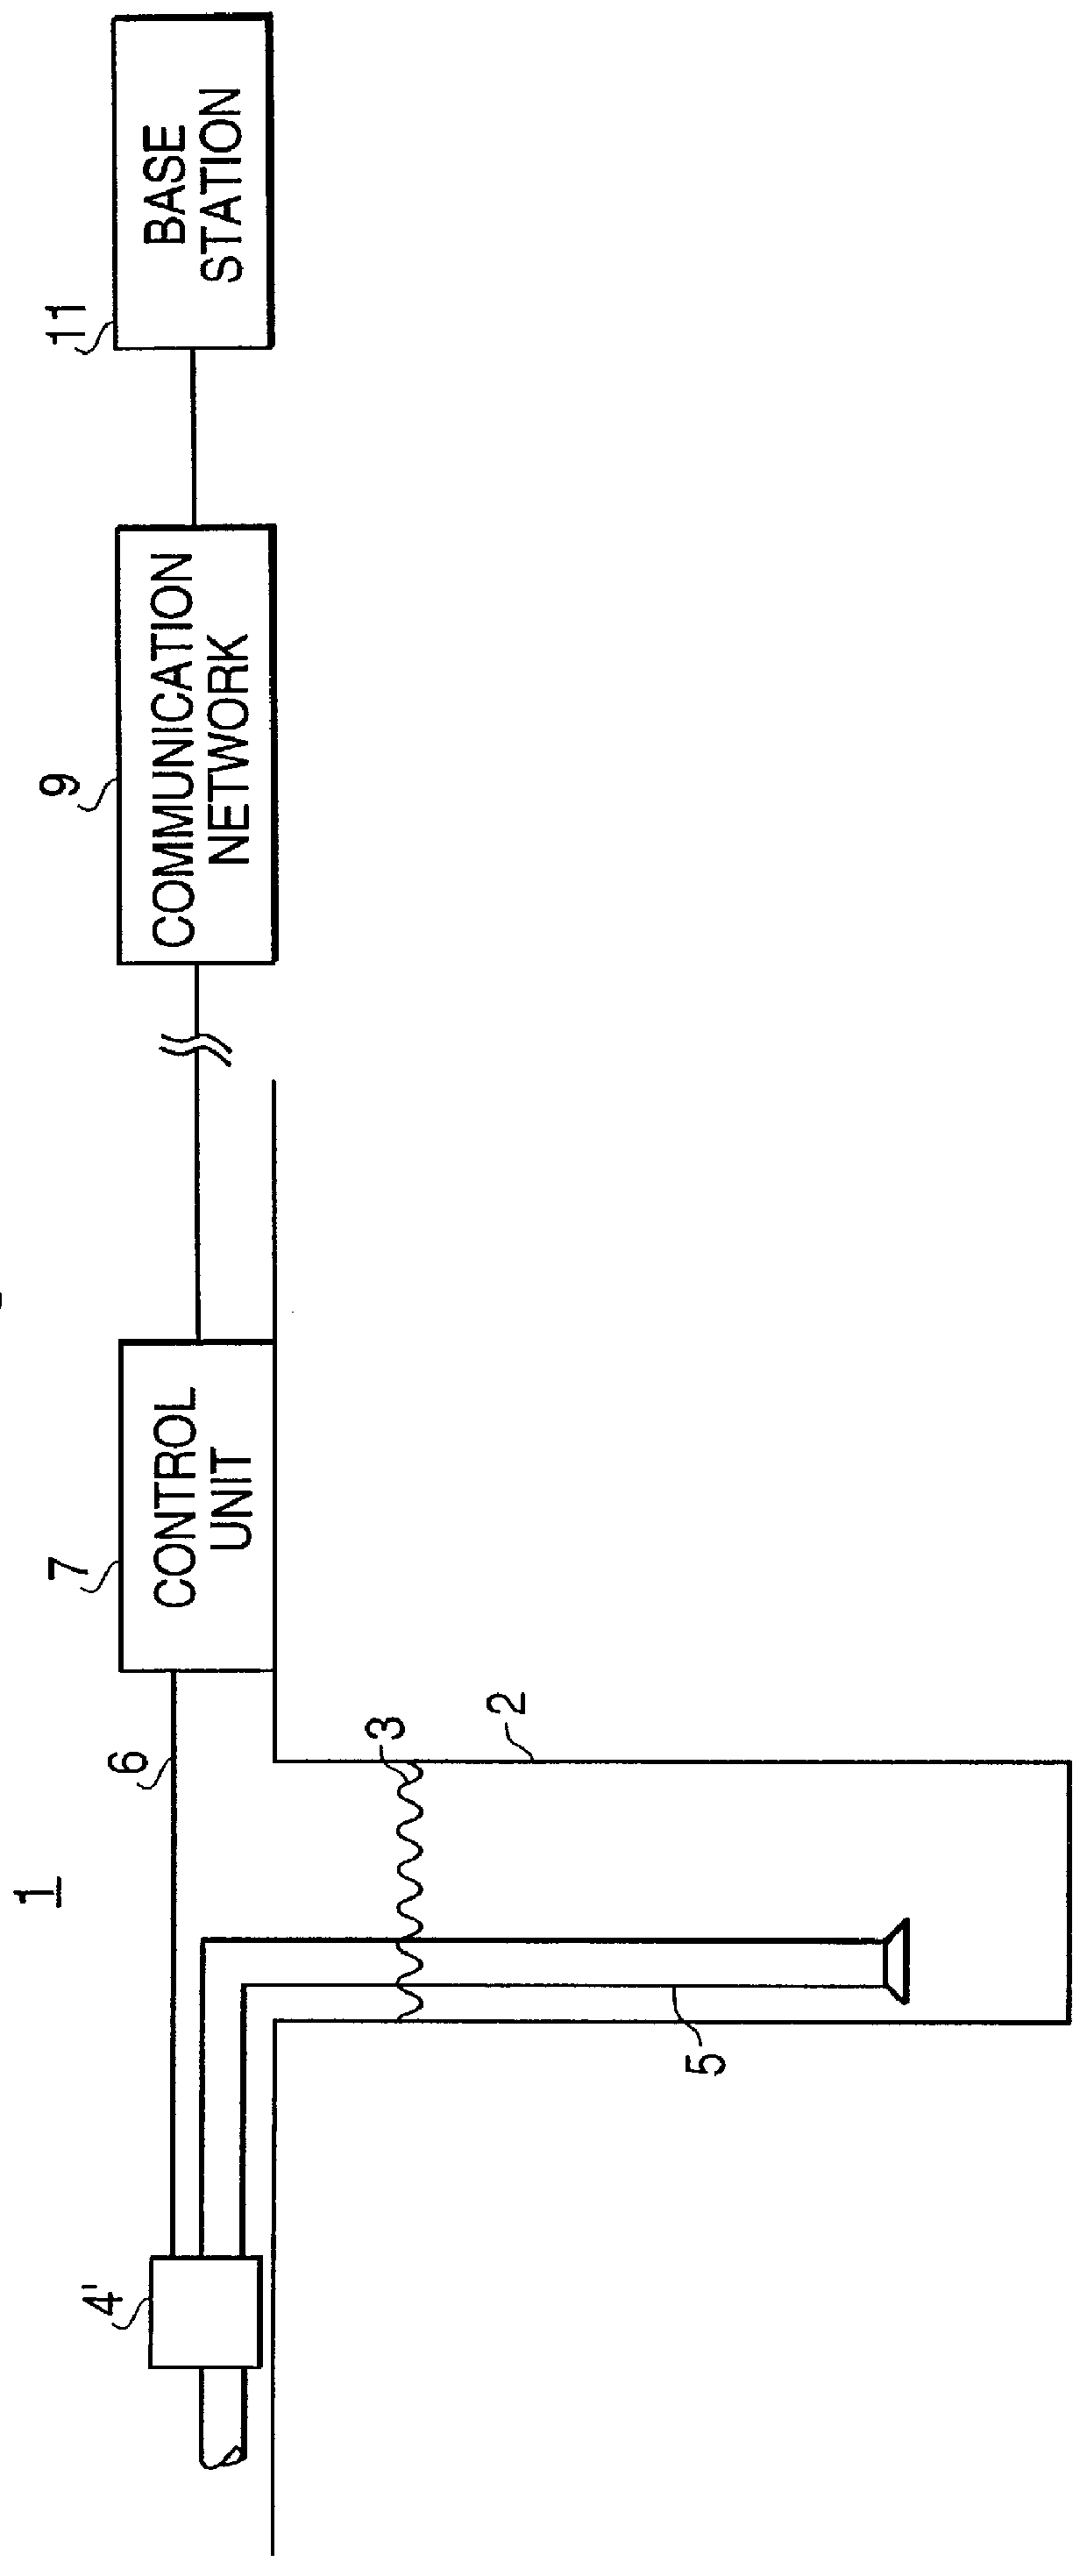 Automated groundwater monitoring system and method